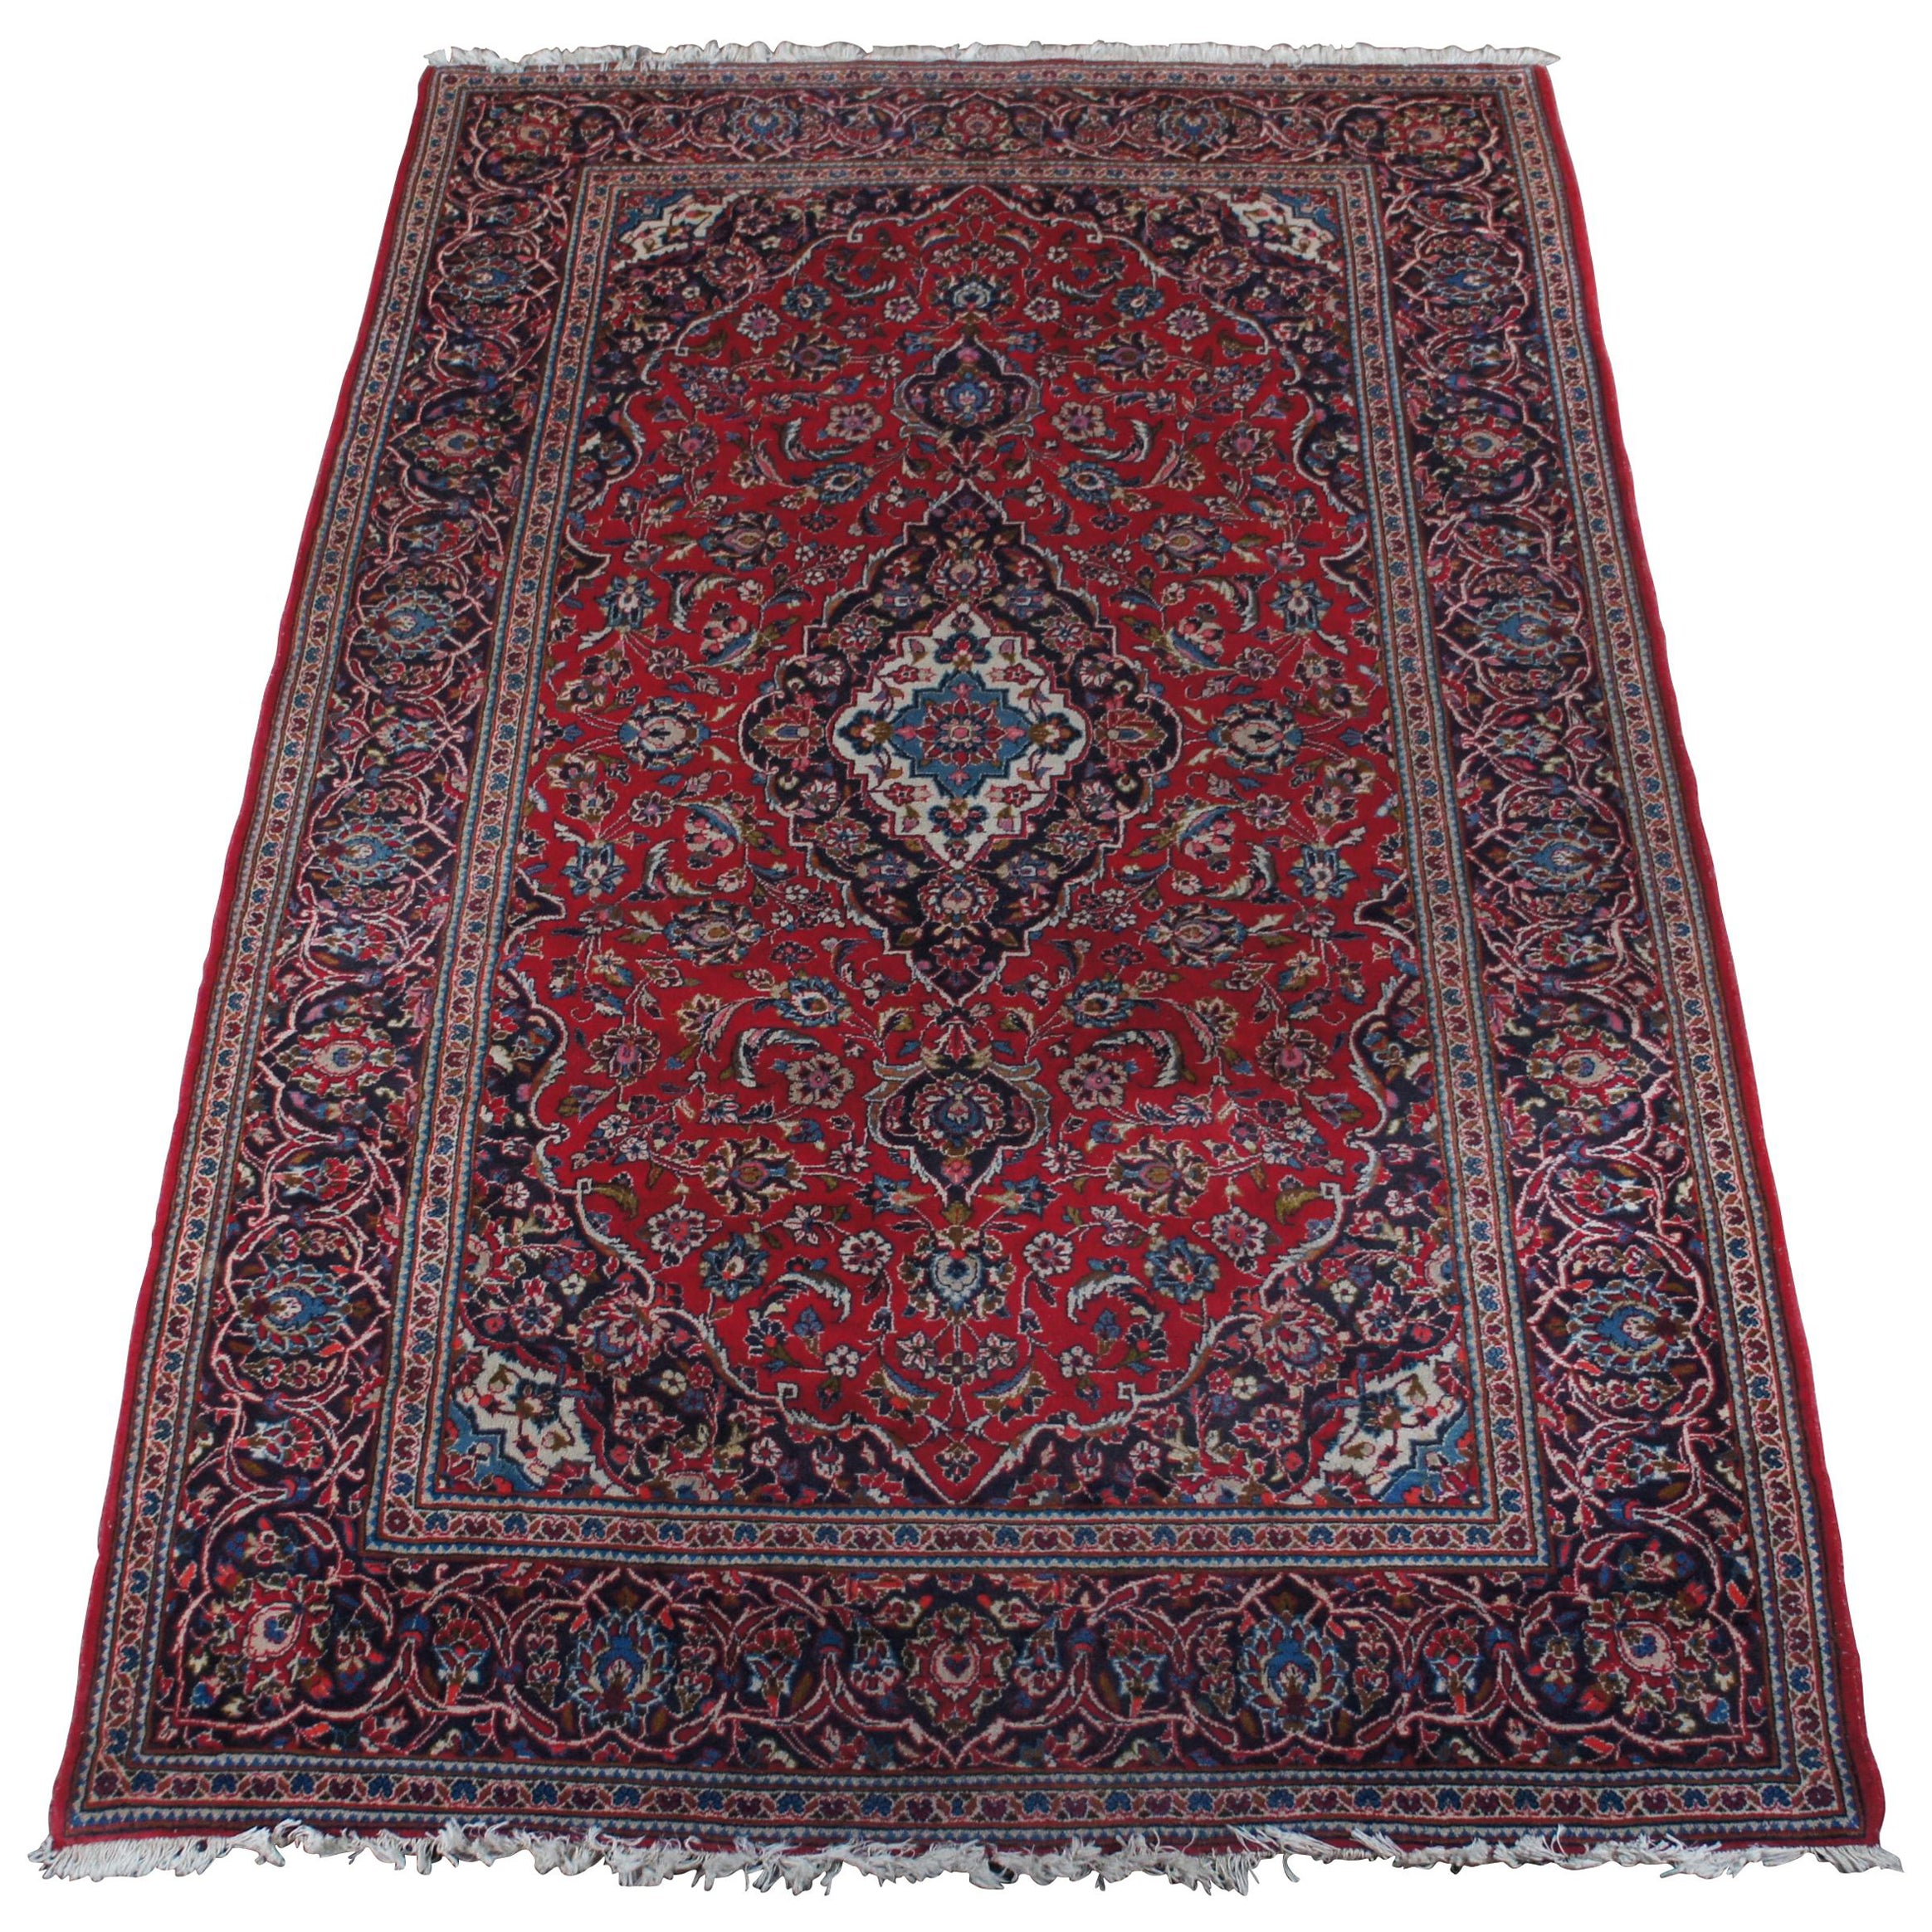 Vintage Hand Knotted Kashan Persian Blue & Red Wool Area Rug Carpet 6.5' x 10'